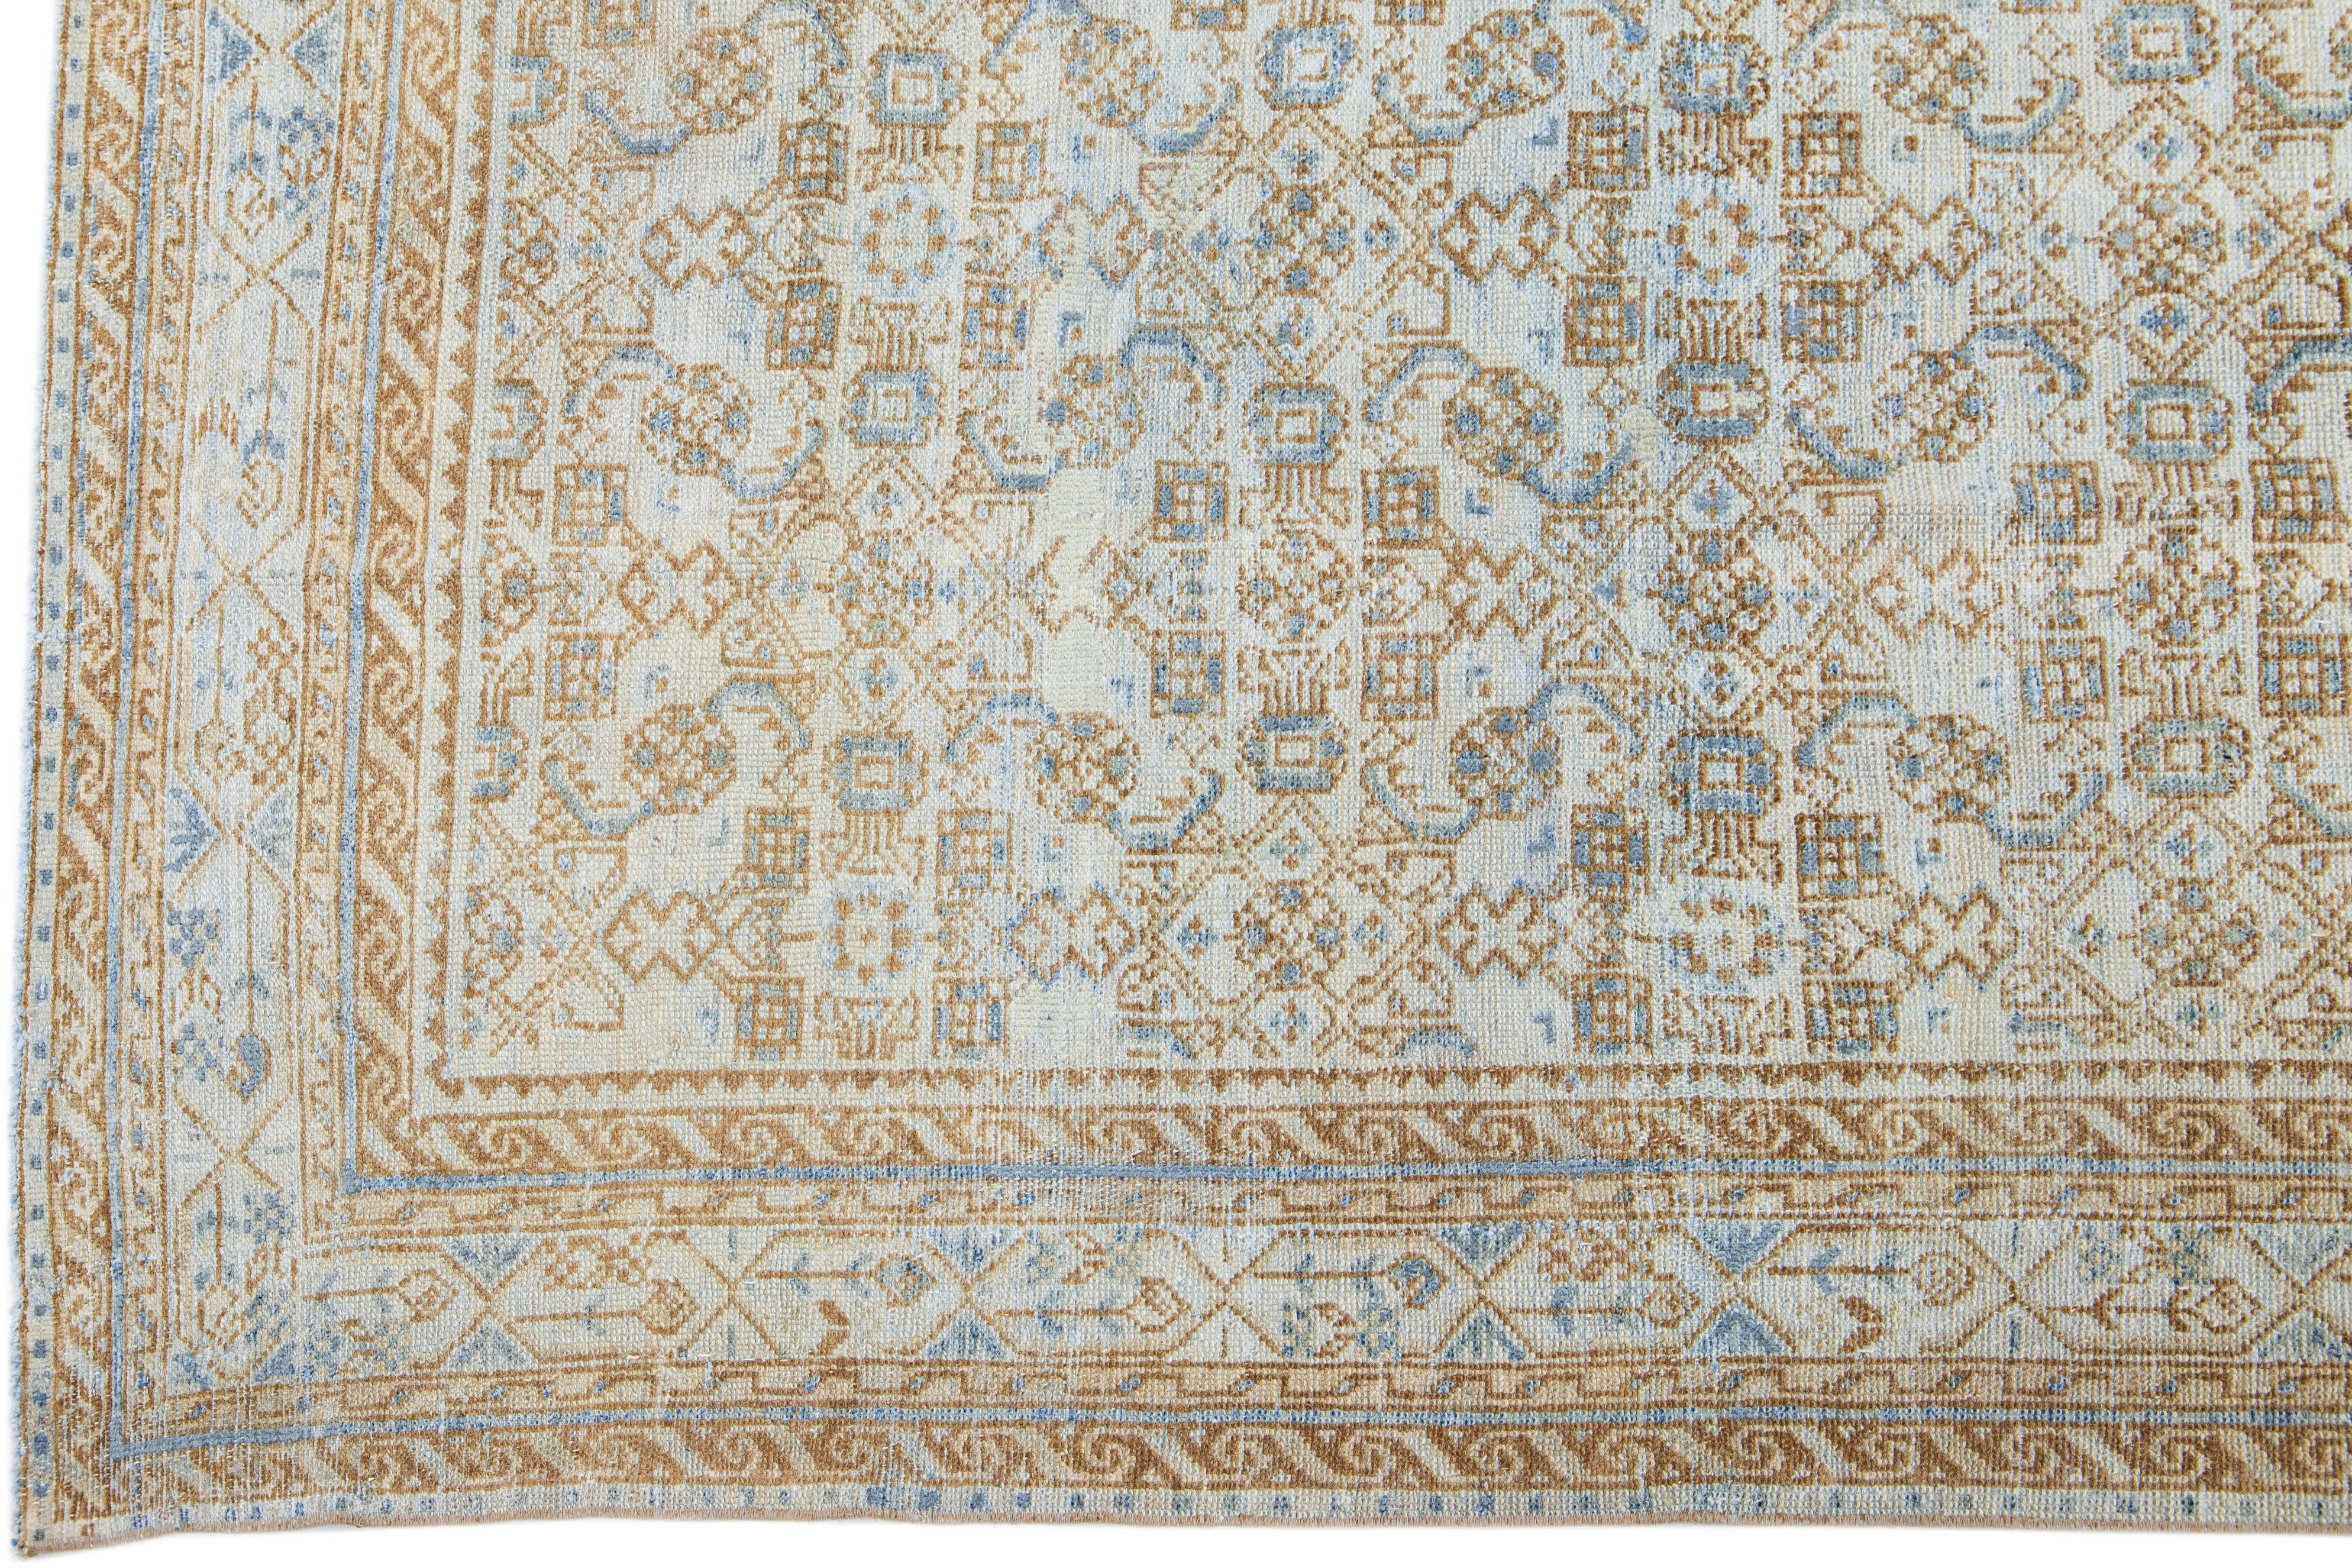 Antique Persian Mahal Wool Rug with Allover Design in Beige In Good Condition For Sale In Norwalk, CT